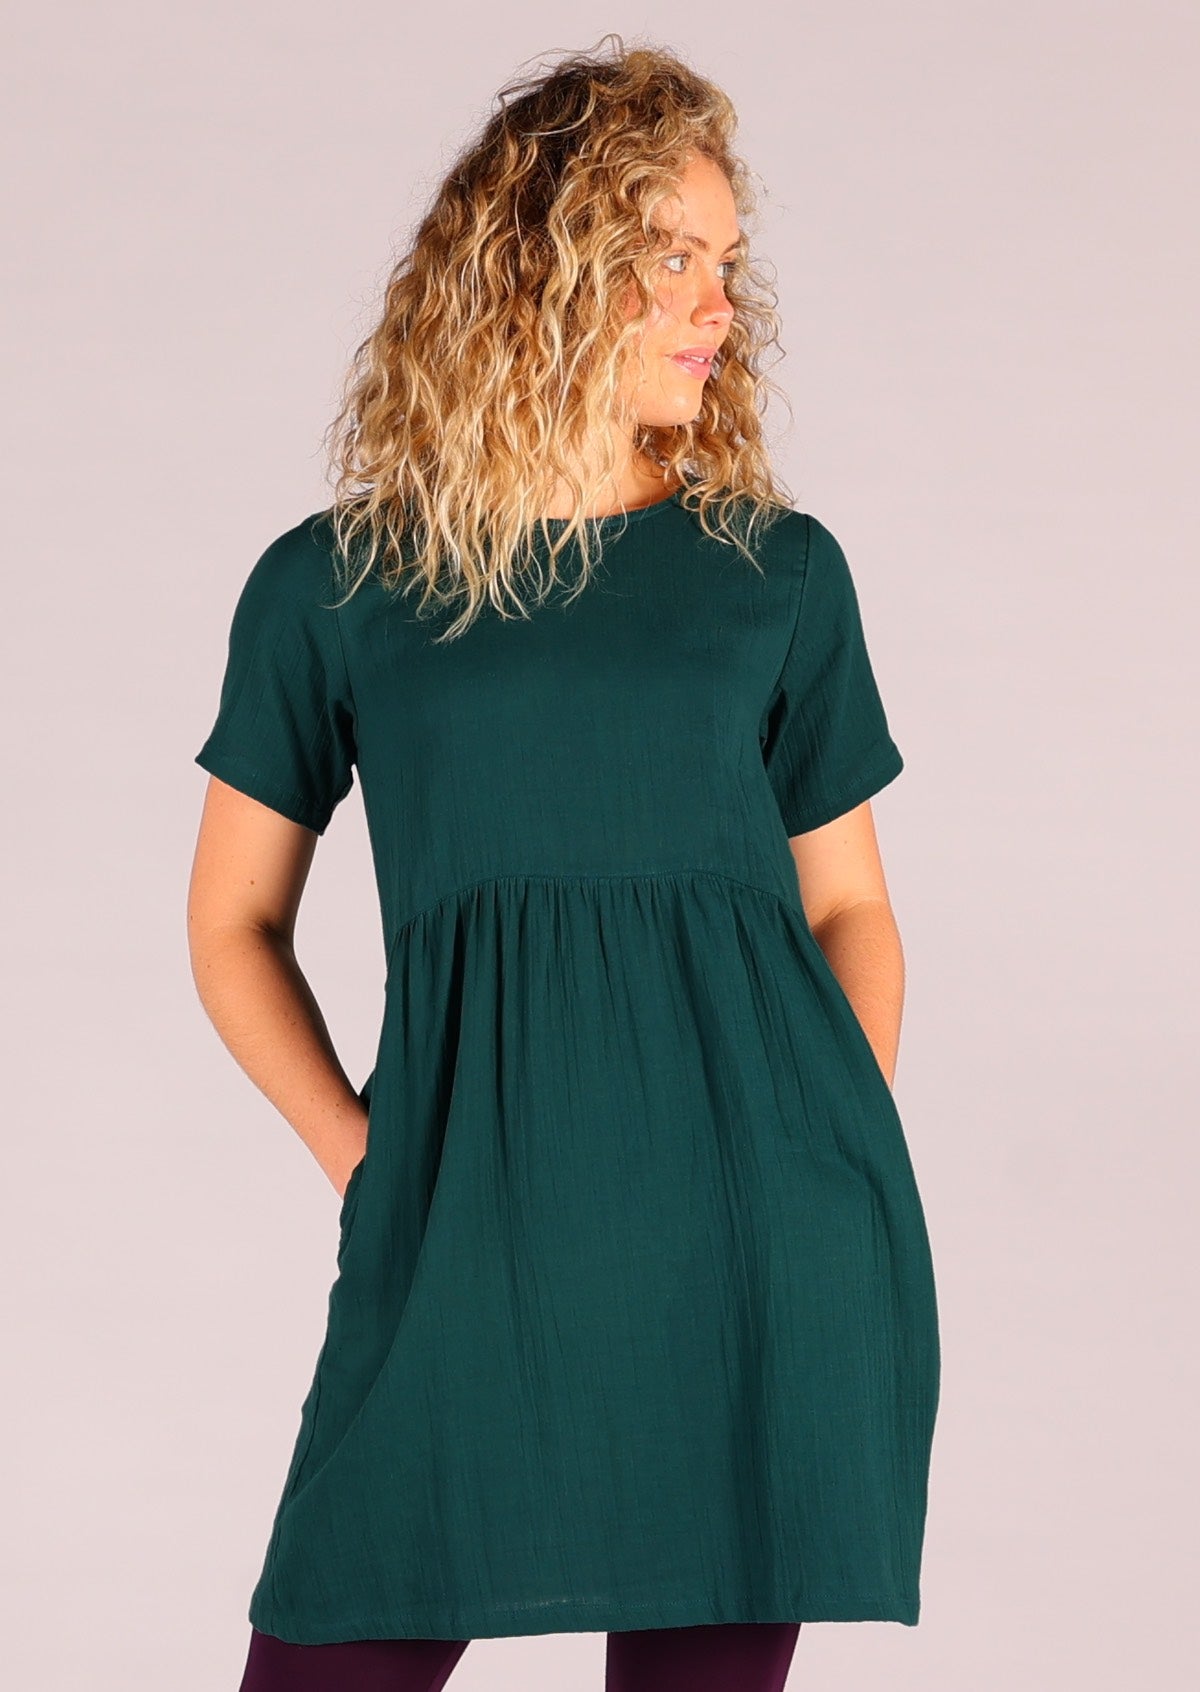 Gorgeous deep teal double cotton relaxed fit dress that sits above the knee